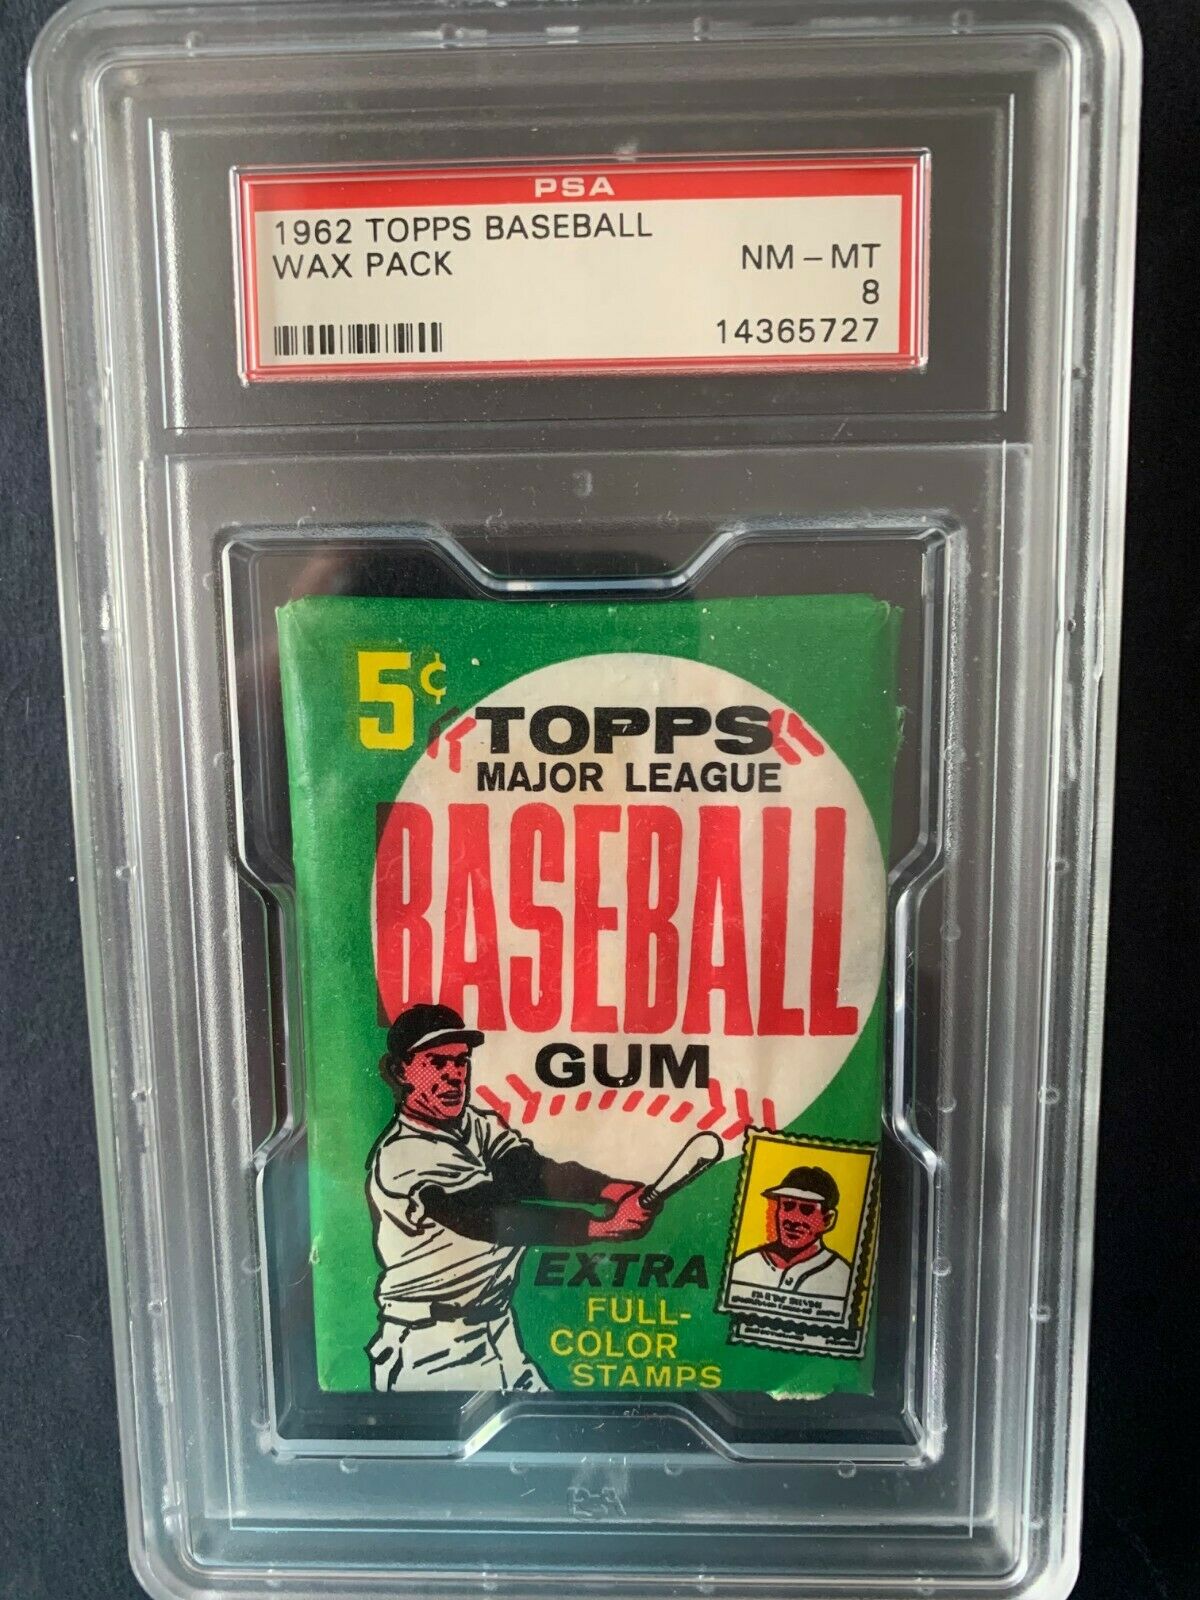 1962 TOPPS BASEBALL WAX PACK PSA 8 UNKNOWN SERIES POSSIBLE MANTLE